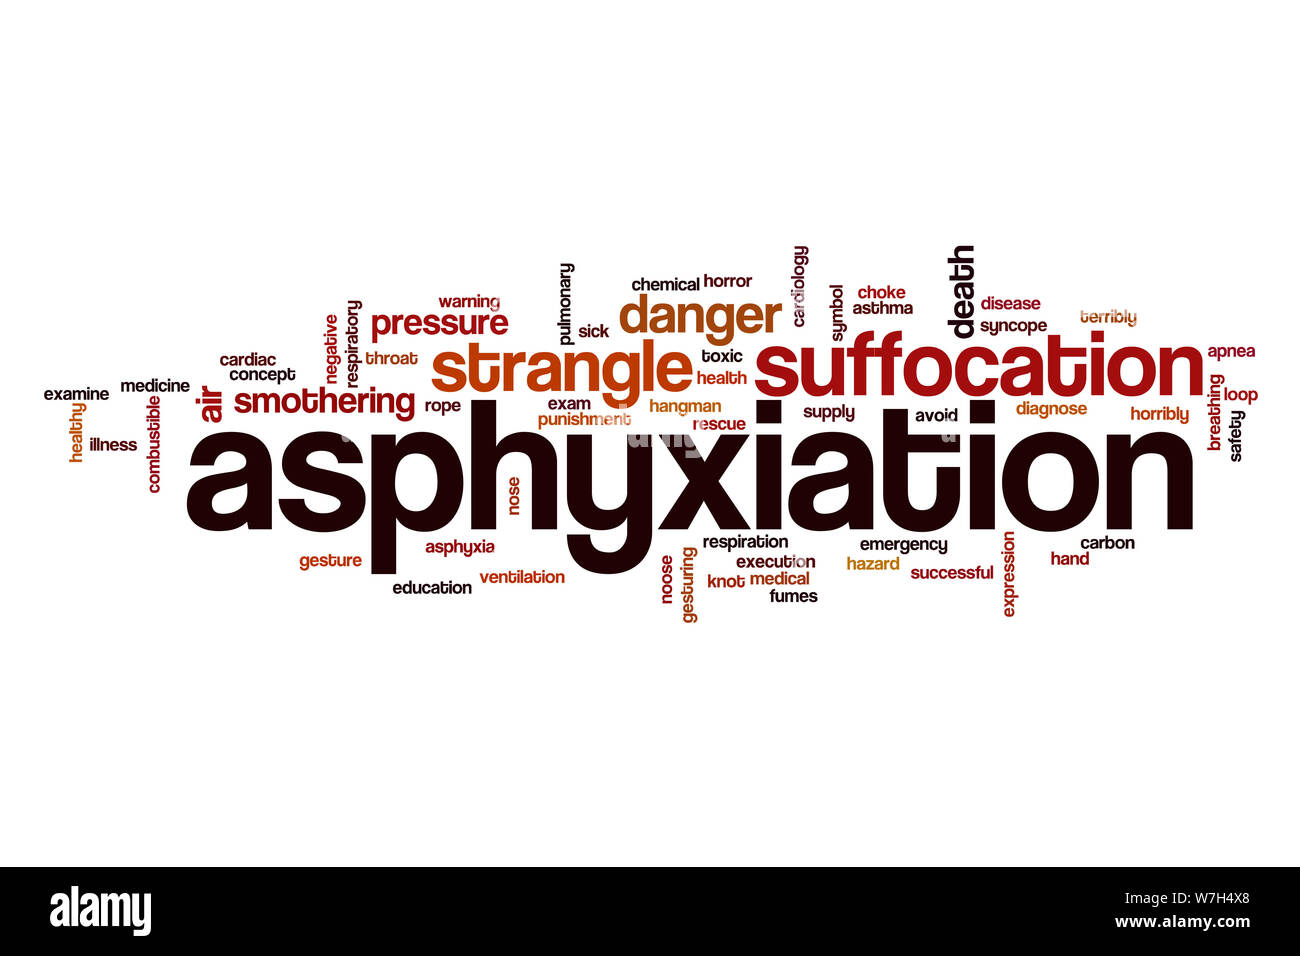 Asphyxiation word cloud Stock Photo